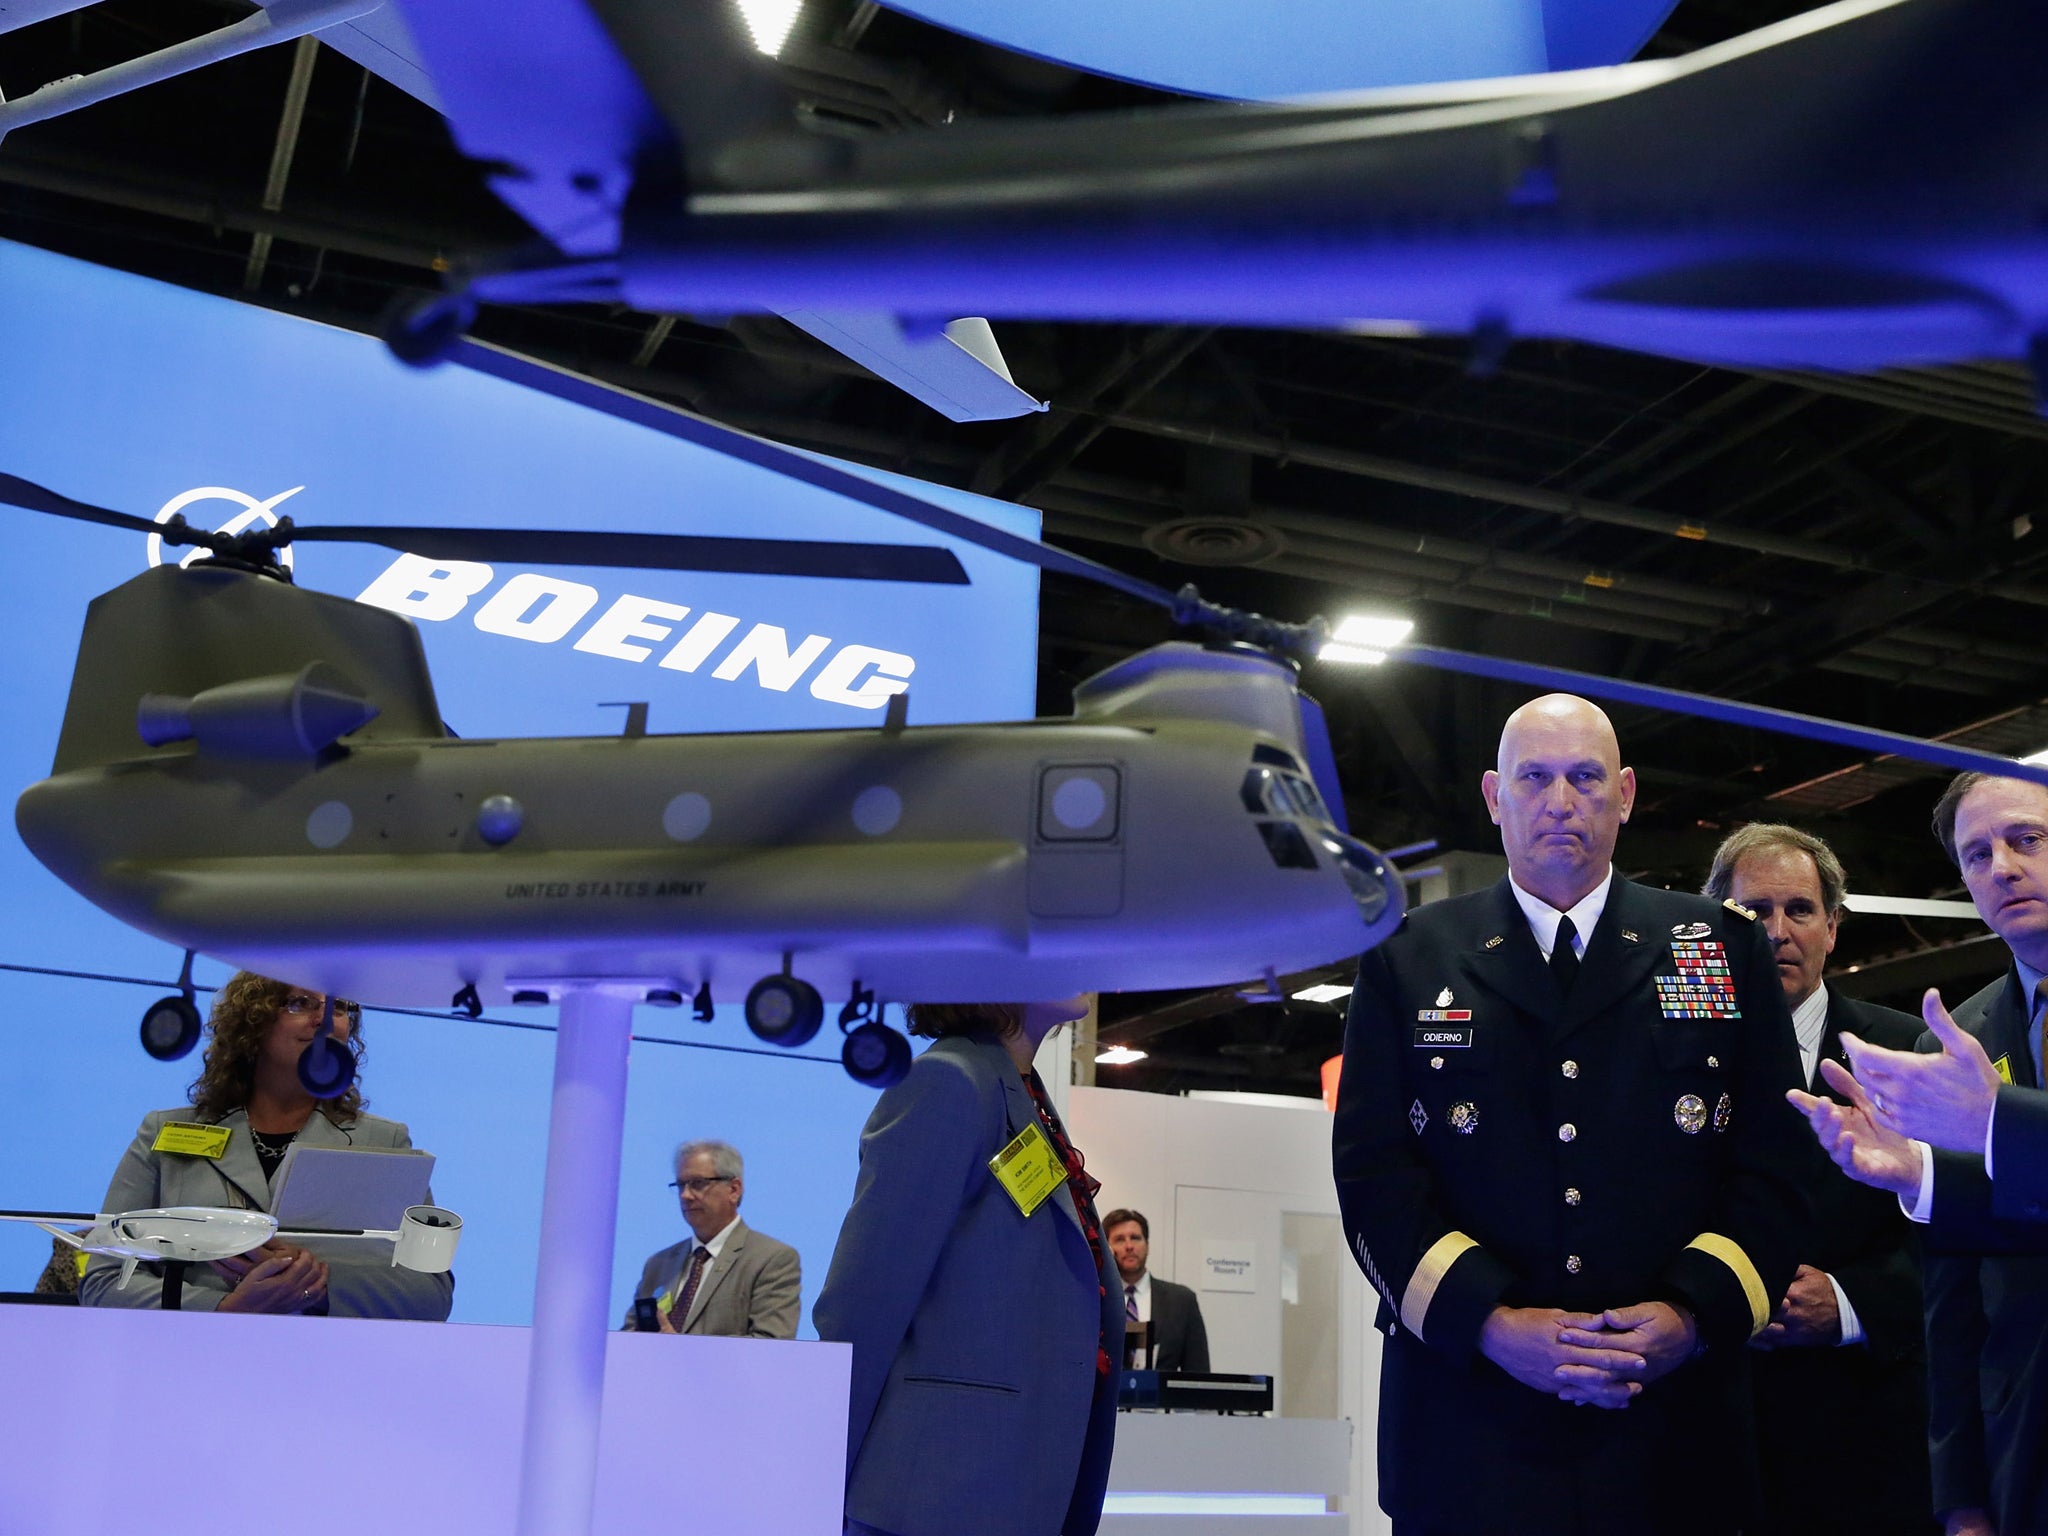 U.S. Army Chief of Staff Gen. Raymond Odierno talks with Boeing Army Systems Vice President Jamey Moran and other executives in their booth during the Association of the United States Army annual meeting and exposition at the Washington Convention Center